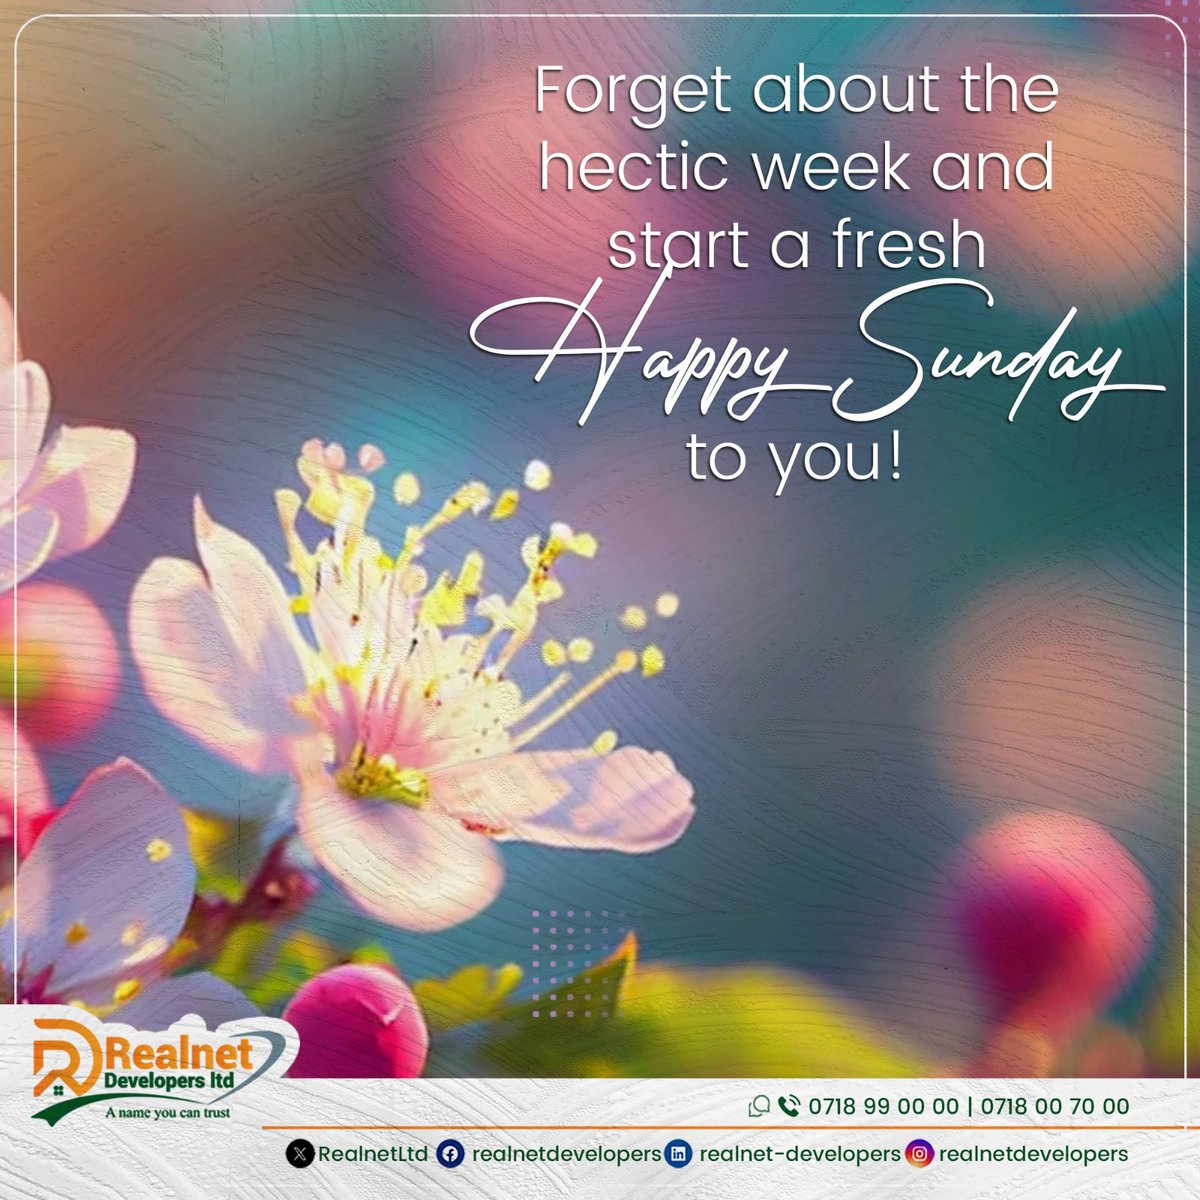 Hello Sunday! 📷
Time to hit the reset button and let go of the chaos from the past week. Embrace the tranquility of today and get ready for a fresh start. 📷📷
What's your favourite Sunday ritual for a fresh start? Share your thoughts!
#SundayVibes #FreshStart #realnetdevelopers